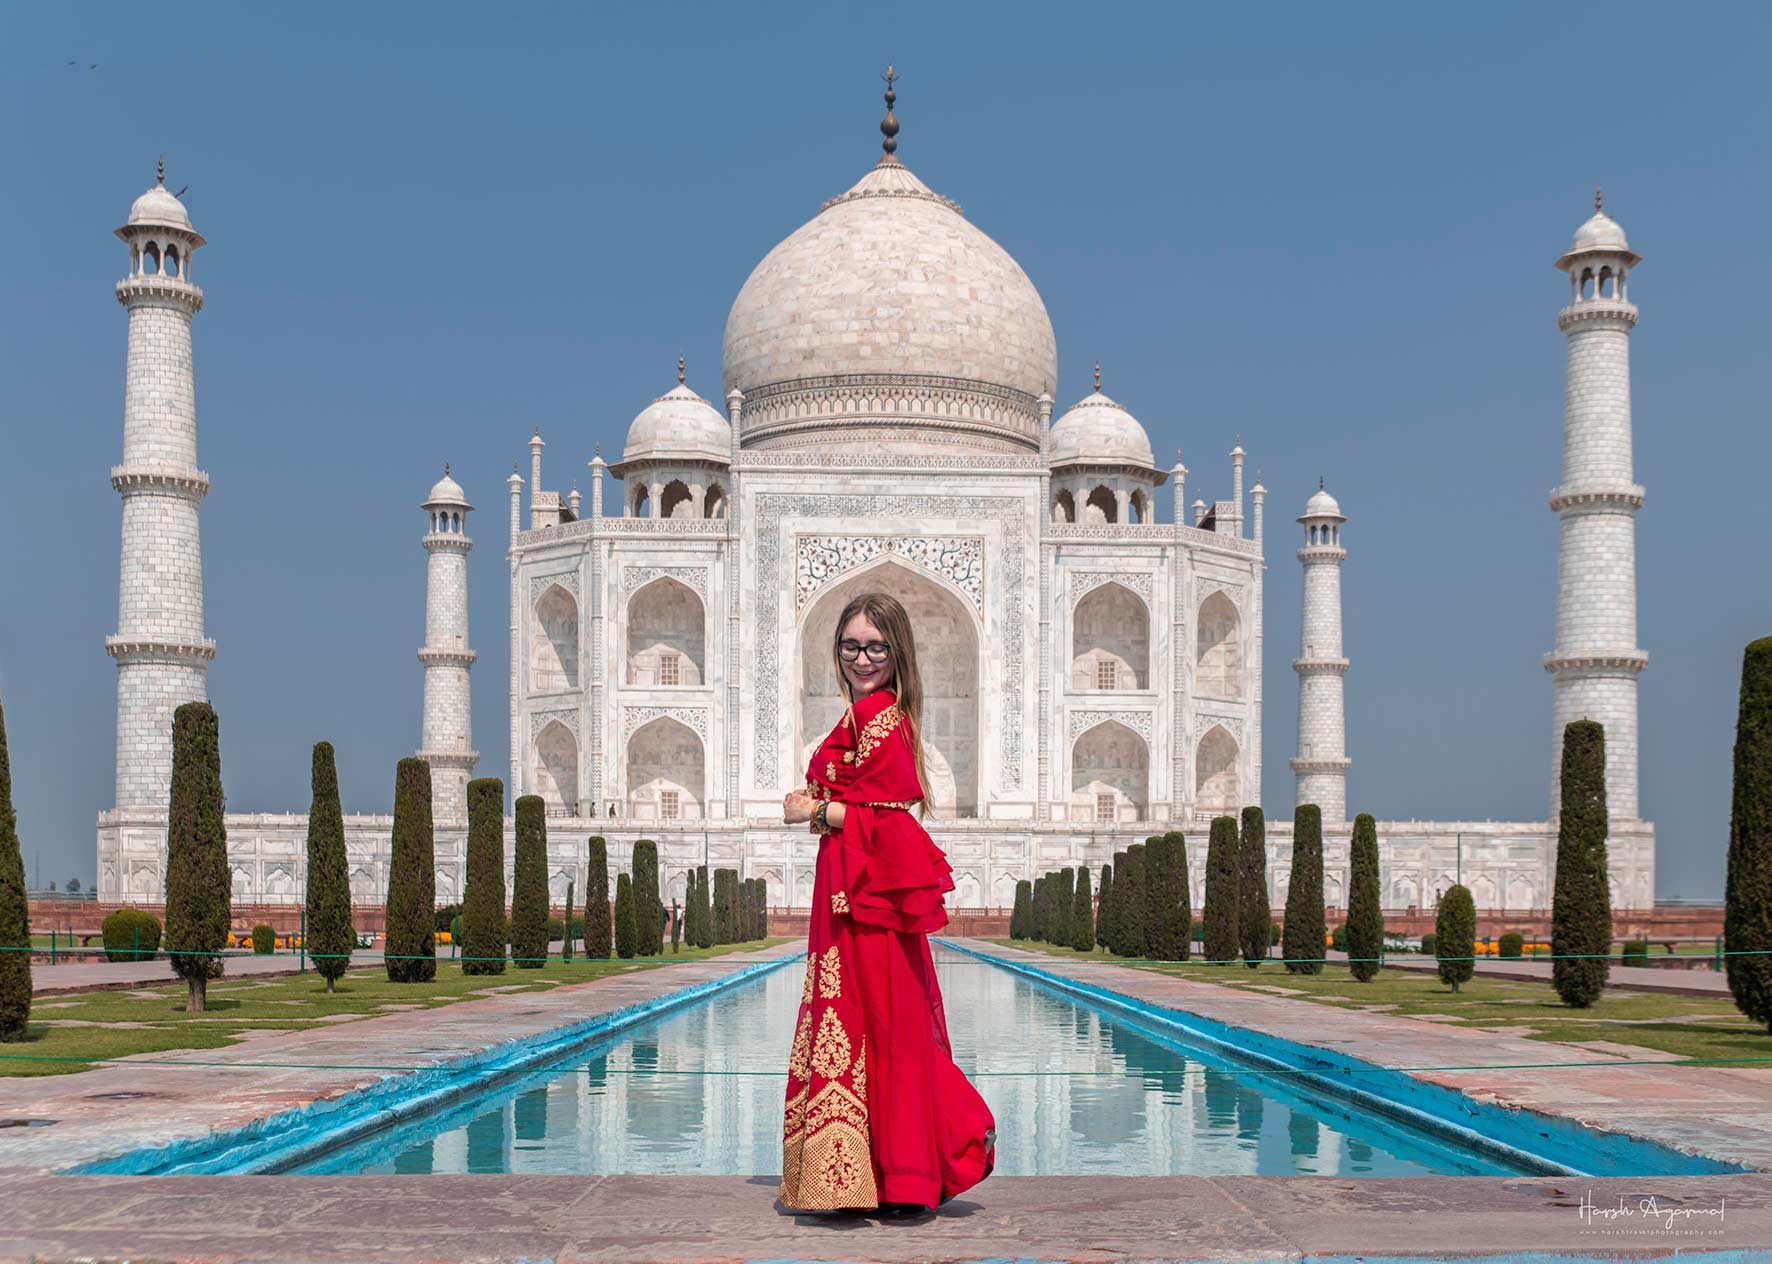 women Only Tour India | India women only Tour | Harsh Agarwal Photography